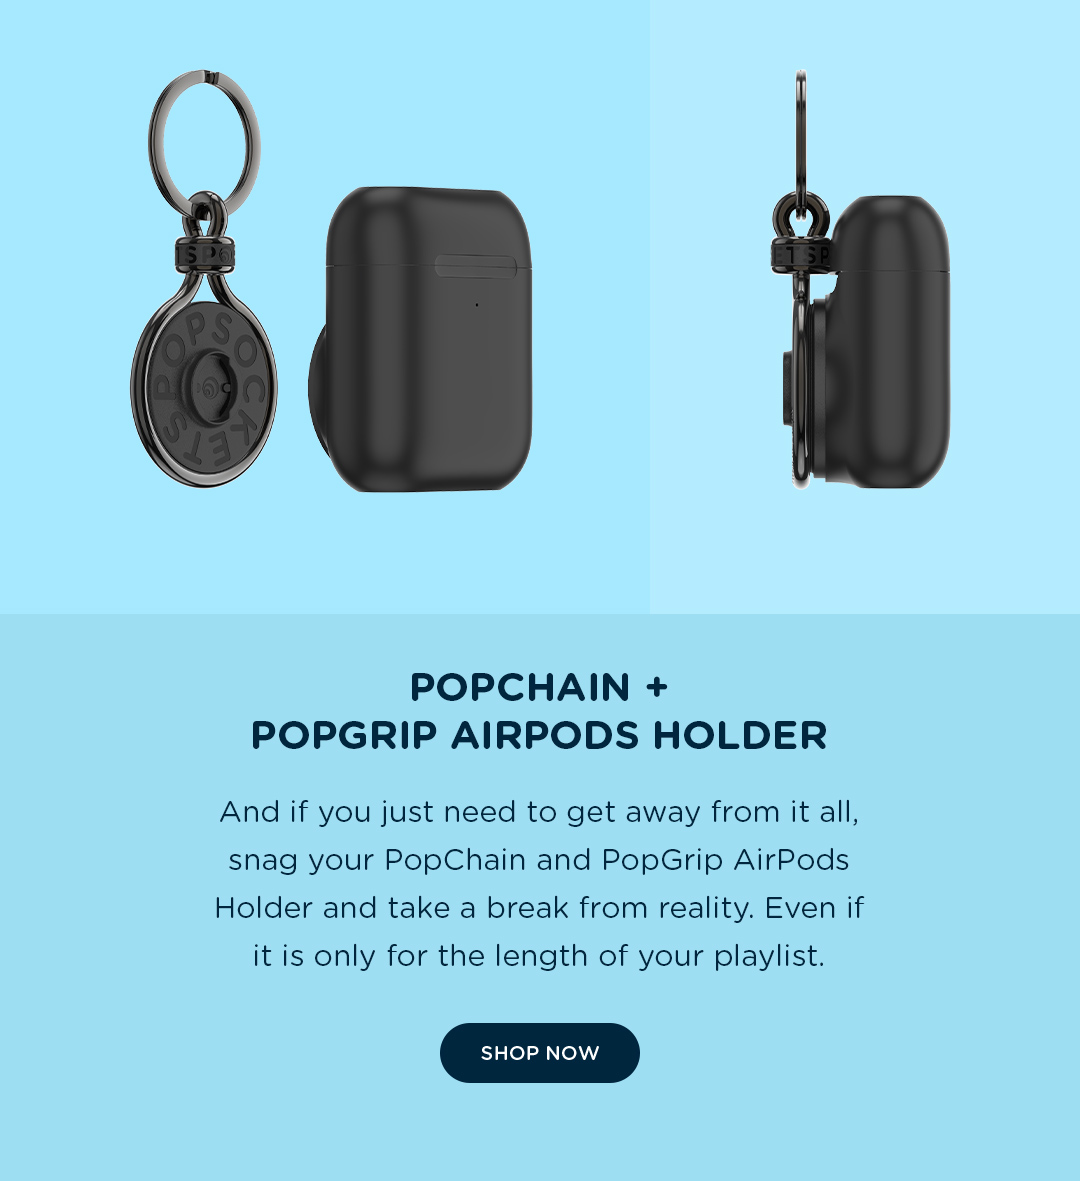 PopChain + PopGrip AirPods Holder  And if you just need to get away from it all, snag your PopChain and PopGrip AirPods Holder and take a break from reality. Even if it is only for the length of your playlist.